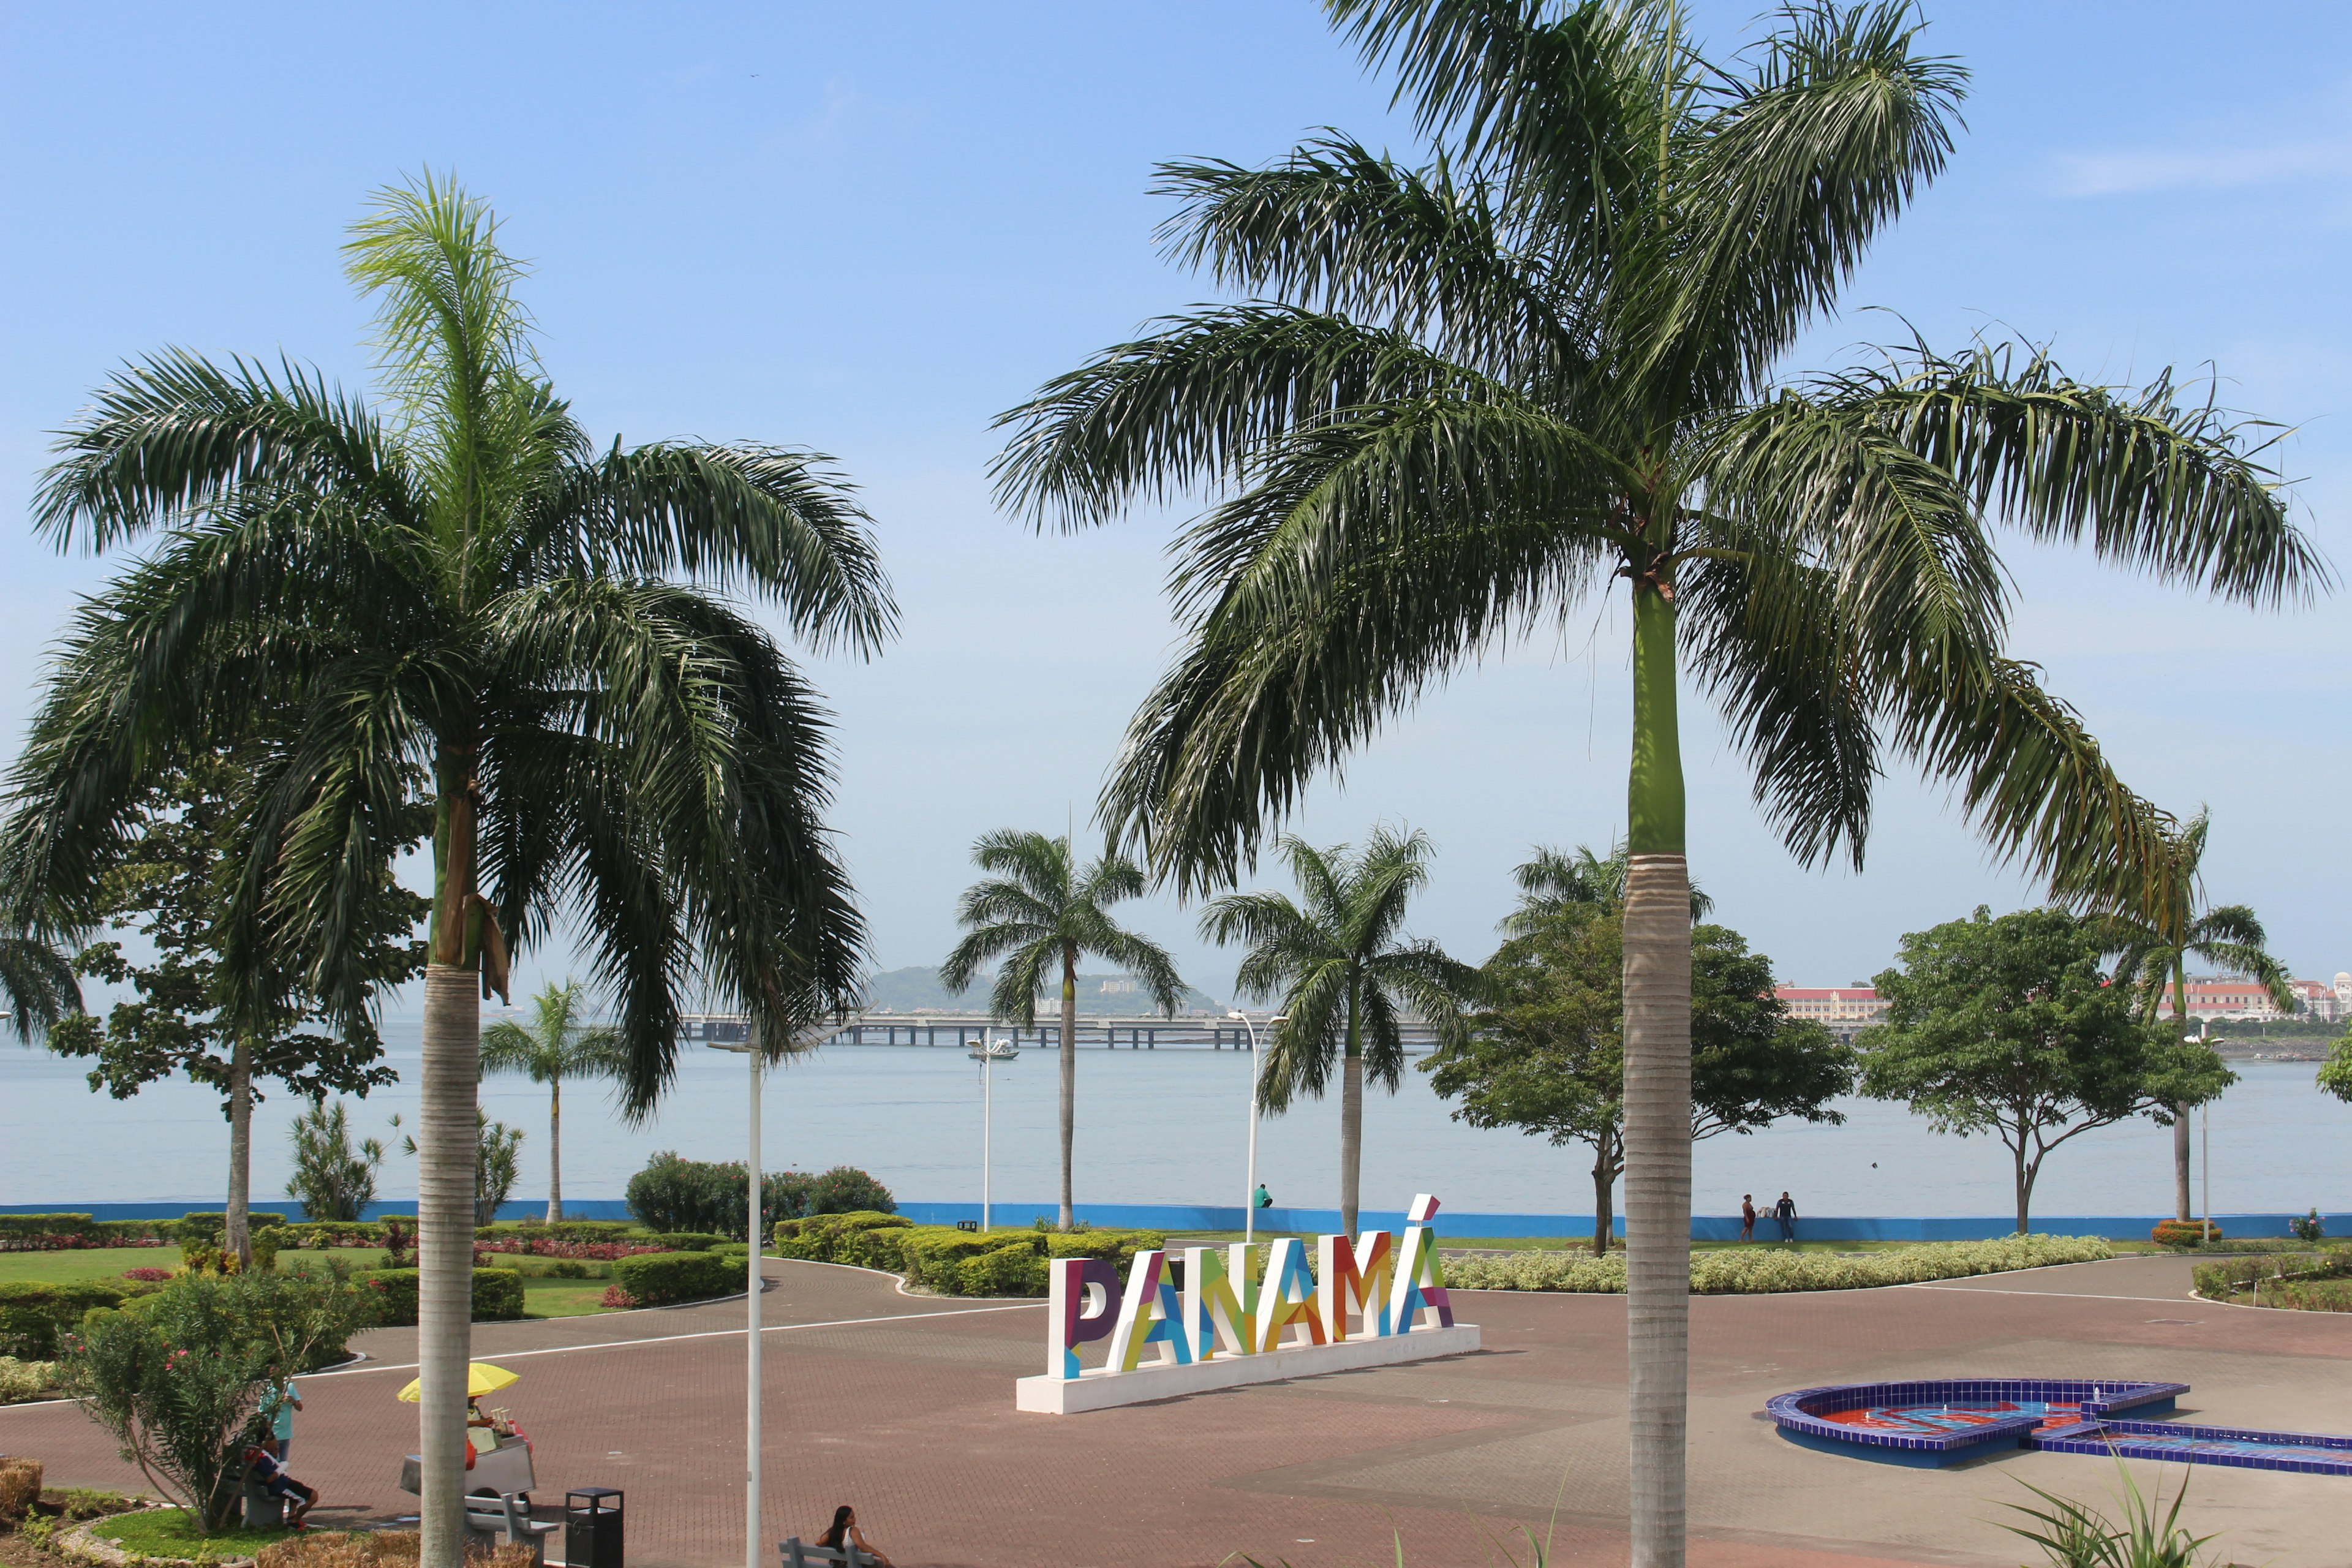 Panama City / Panama - July 18 2019: Colourful Panama sign on Cinta Costera; Shutterstock ID 1735328903; your: ClaireNaylor; gl: 65050; netsuite: Online ed; full: Panama City free
1735328903